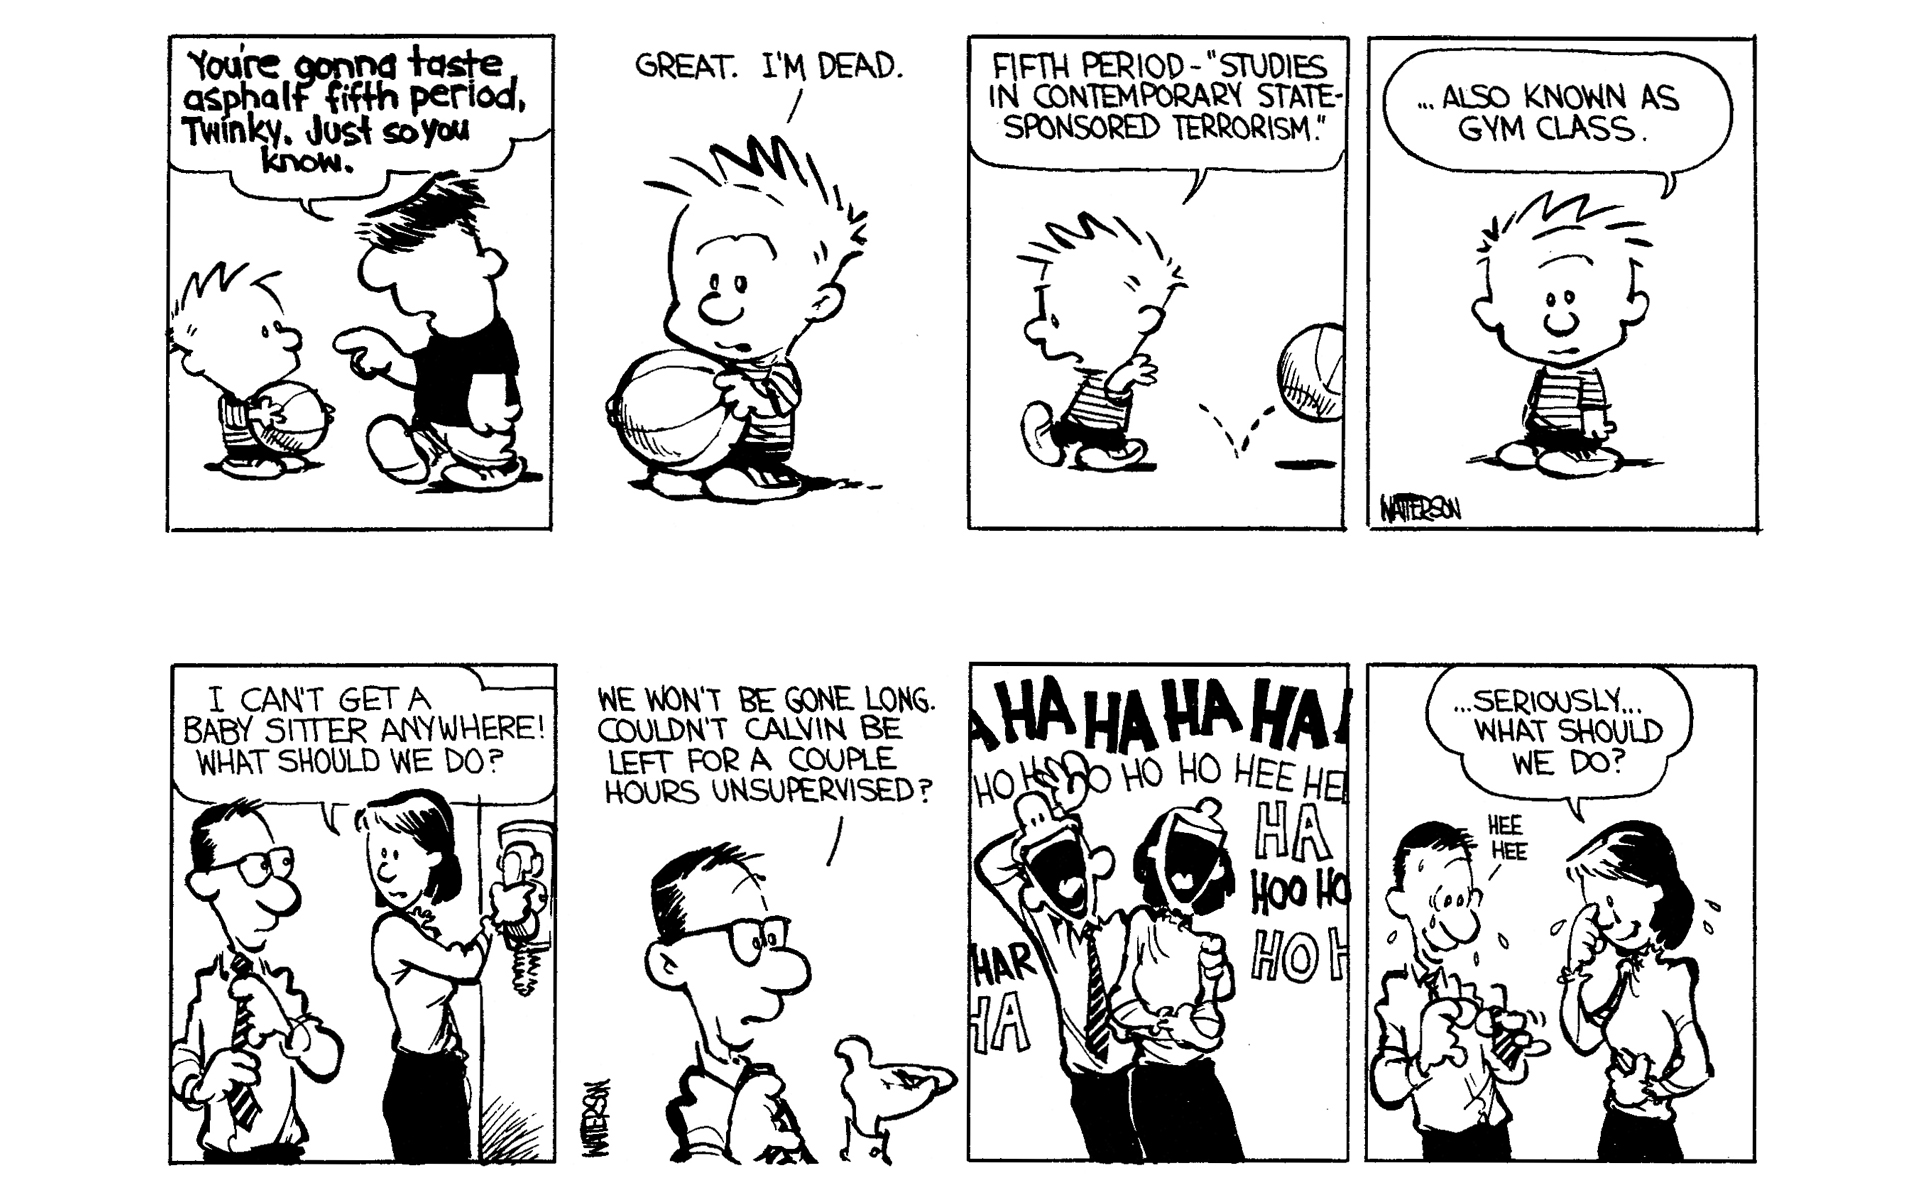 Calvin And Hobbes Issue 1 | Read Calvin And Hobbes Issue 1 comic online in  high quality. Read Full Comic online for free - Read comics online in high  quality .